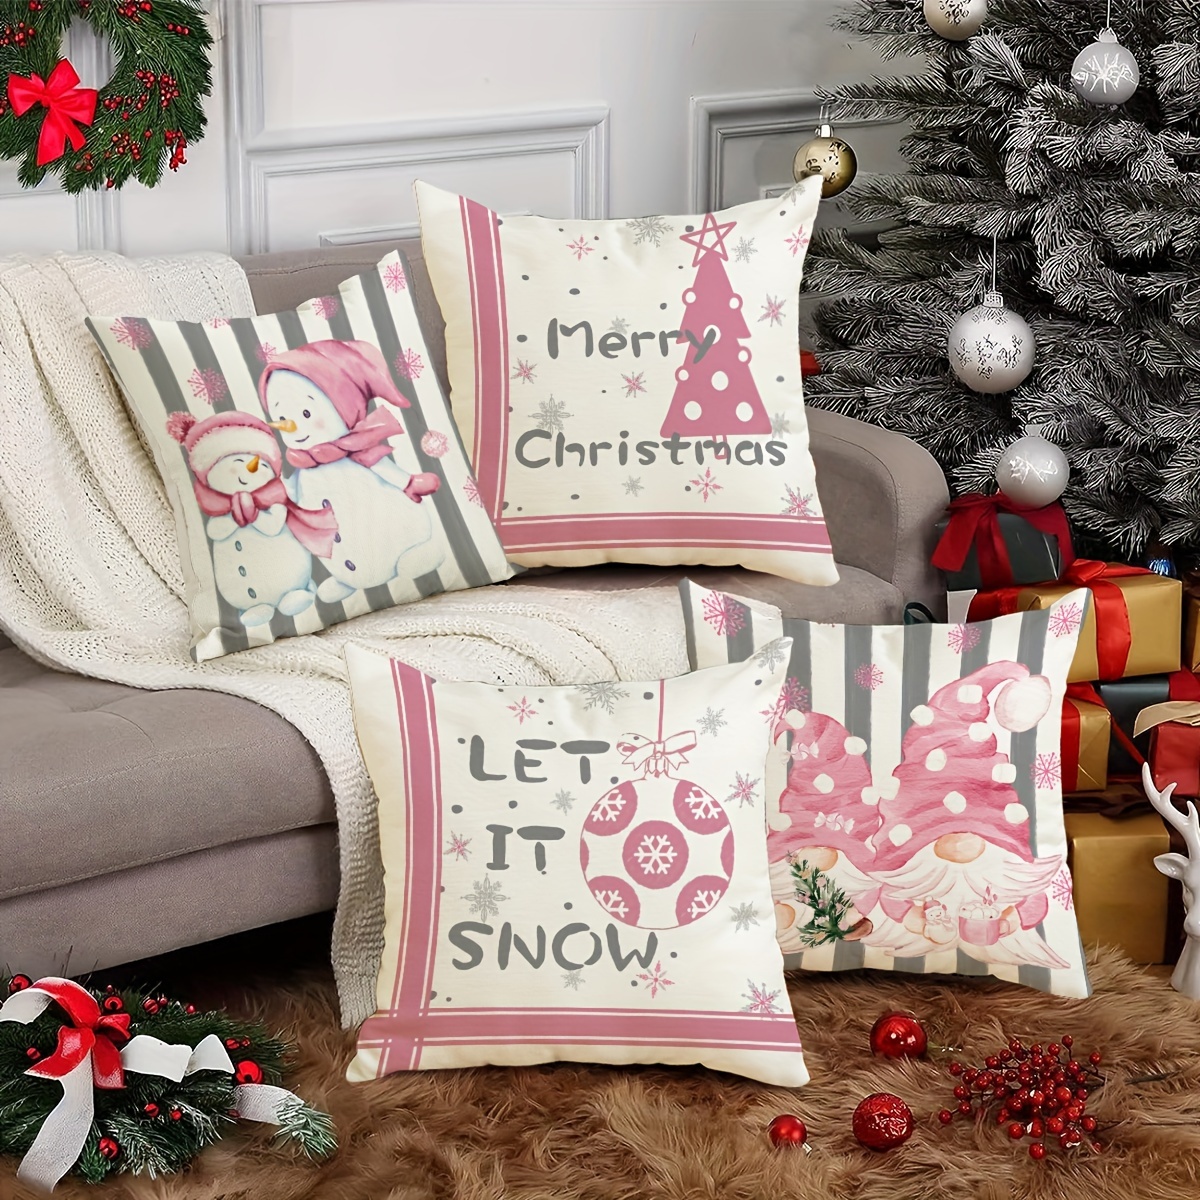 Christmas Snowman Landscaping Christmas Tree Bell Throw Pillow